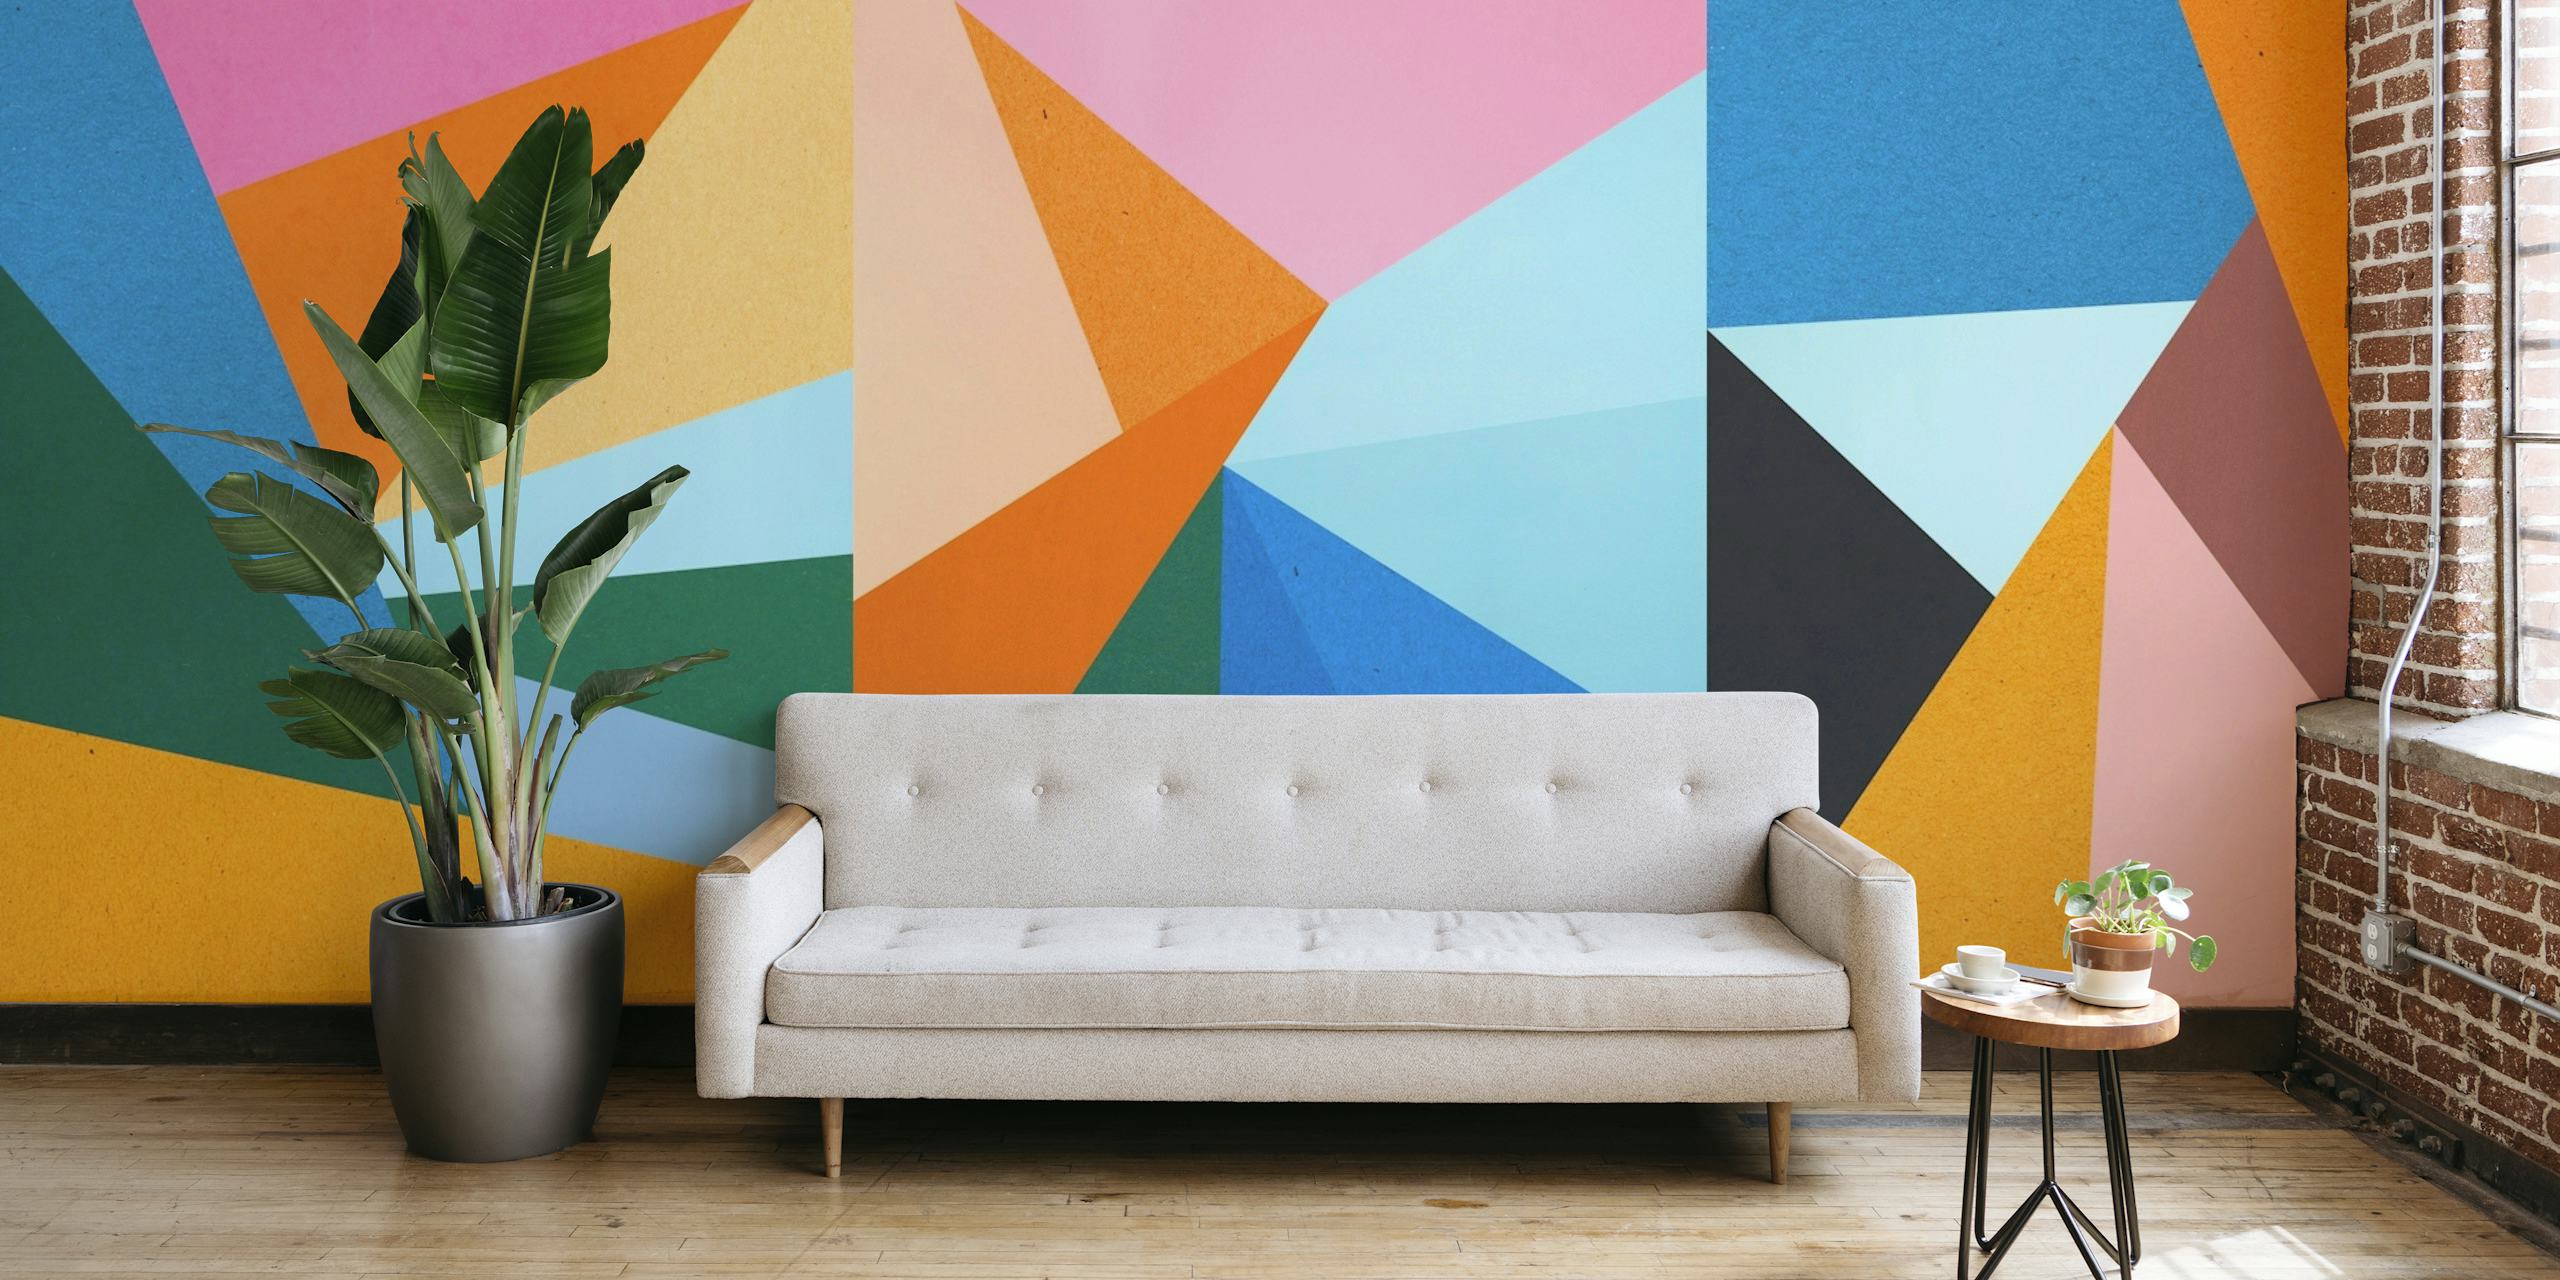 Colorful geometric pattern wall mural with dynamic shapes and a spectrum of colors